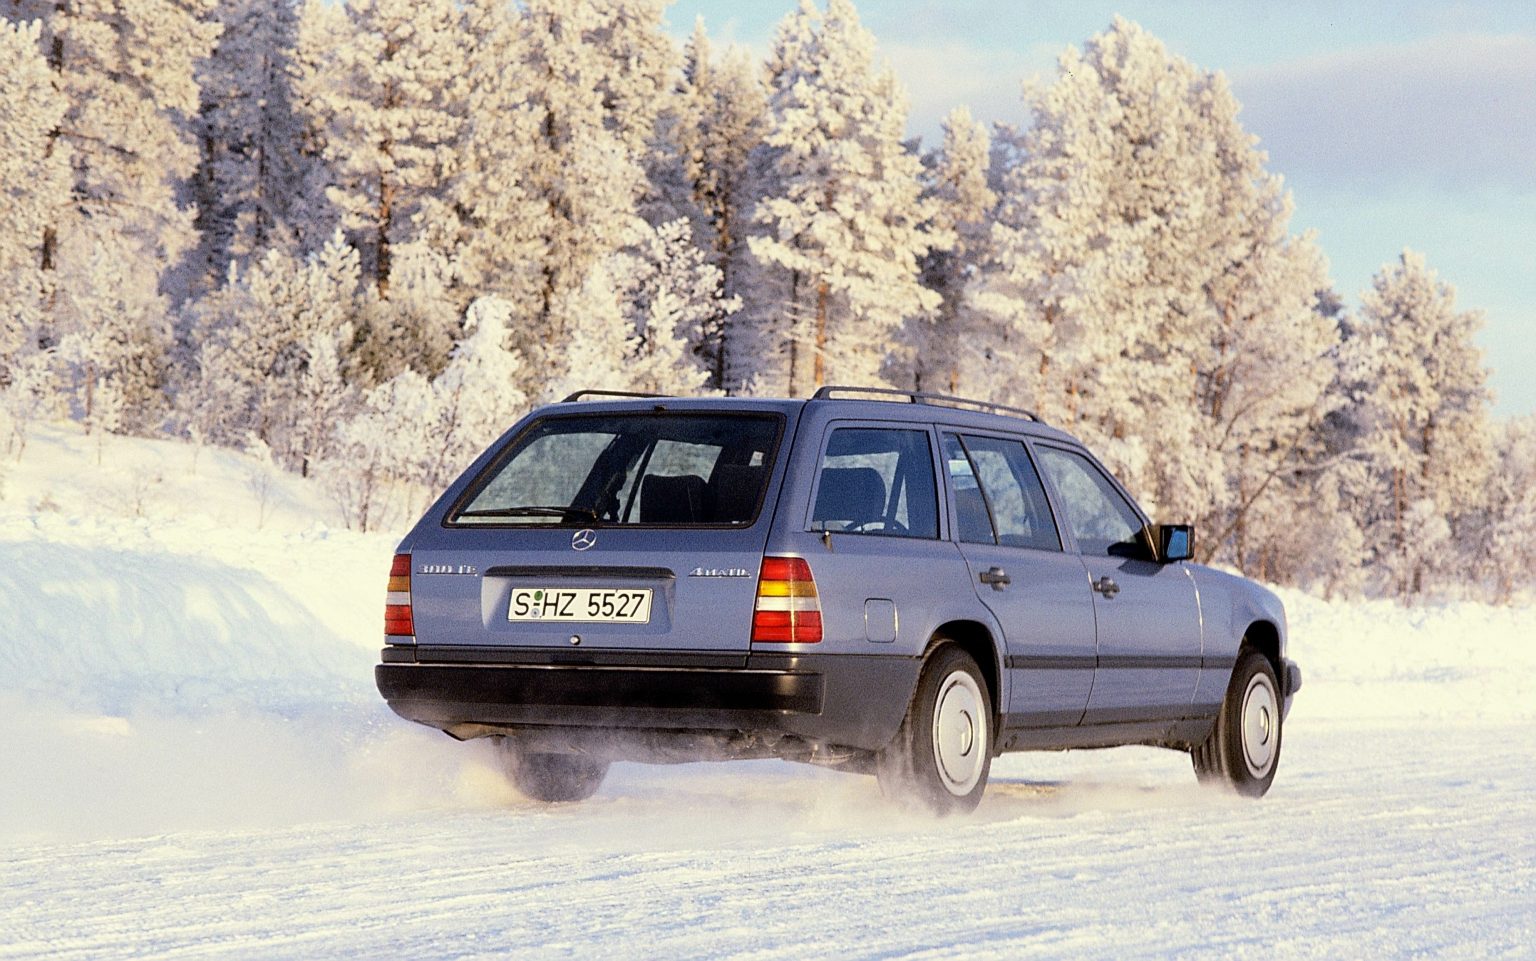 Mercedes-Benz S124 Estate. 4MATIC all-wheel made its debut in the Mercedes-Benz 124 series in 1985.